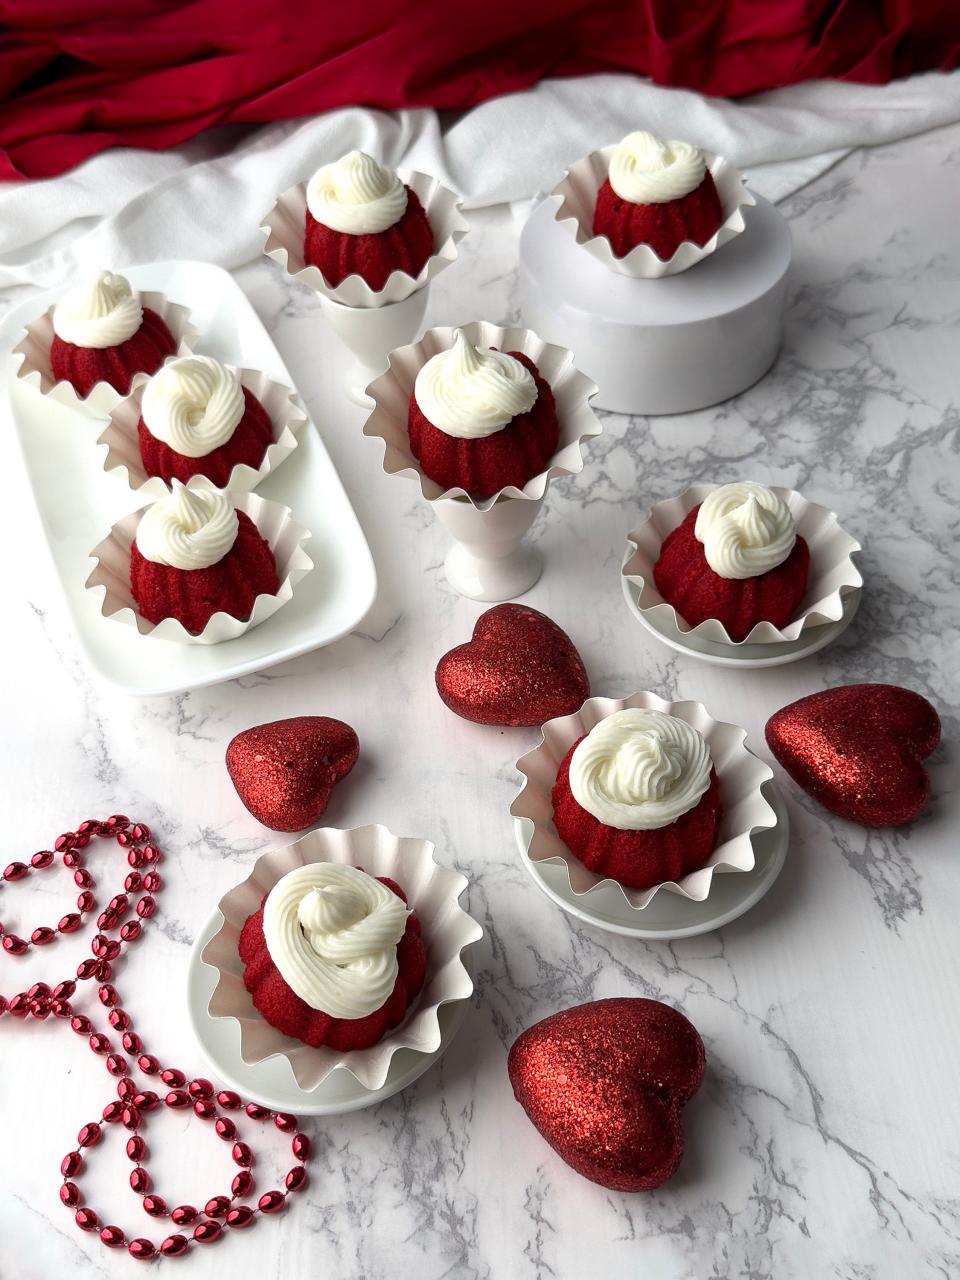 Mini Red Velvet Bundt Cake is perfect for Valentine’s Day because of its rich chocolatey taste and vibrant red color.